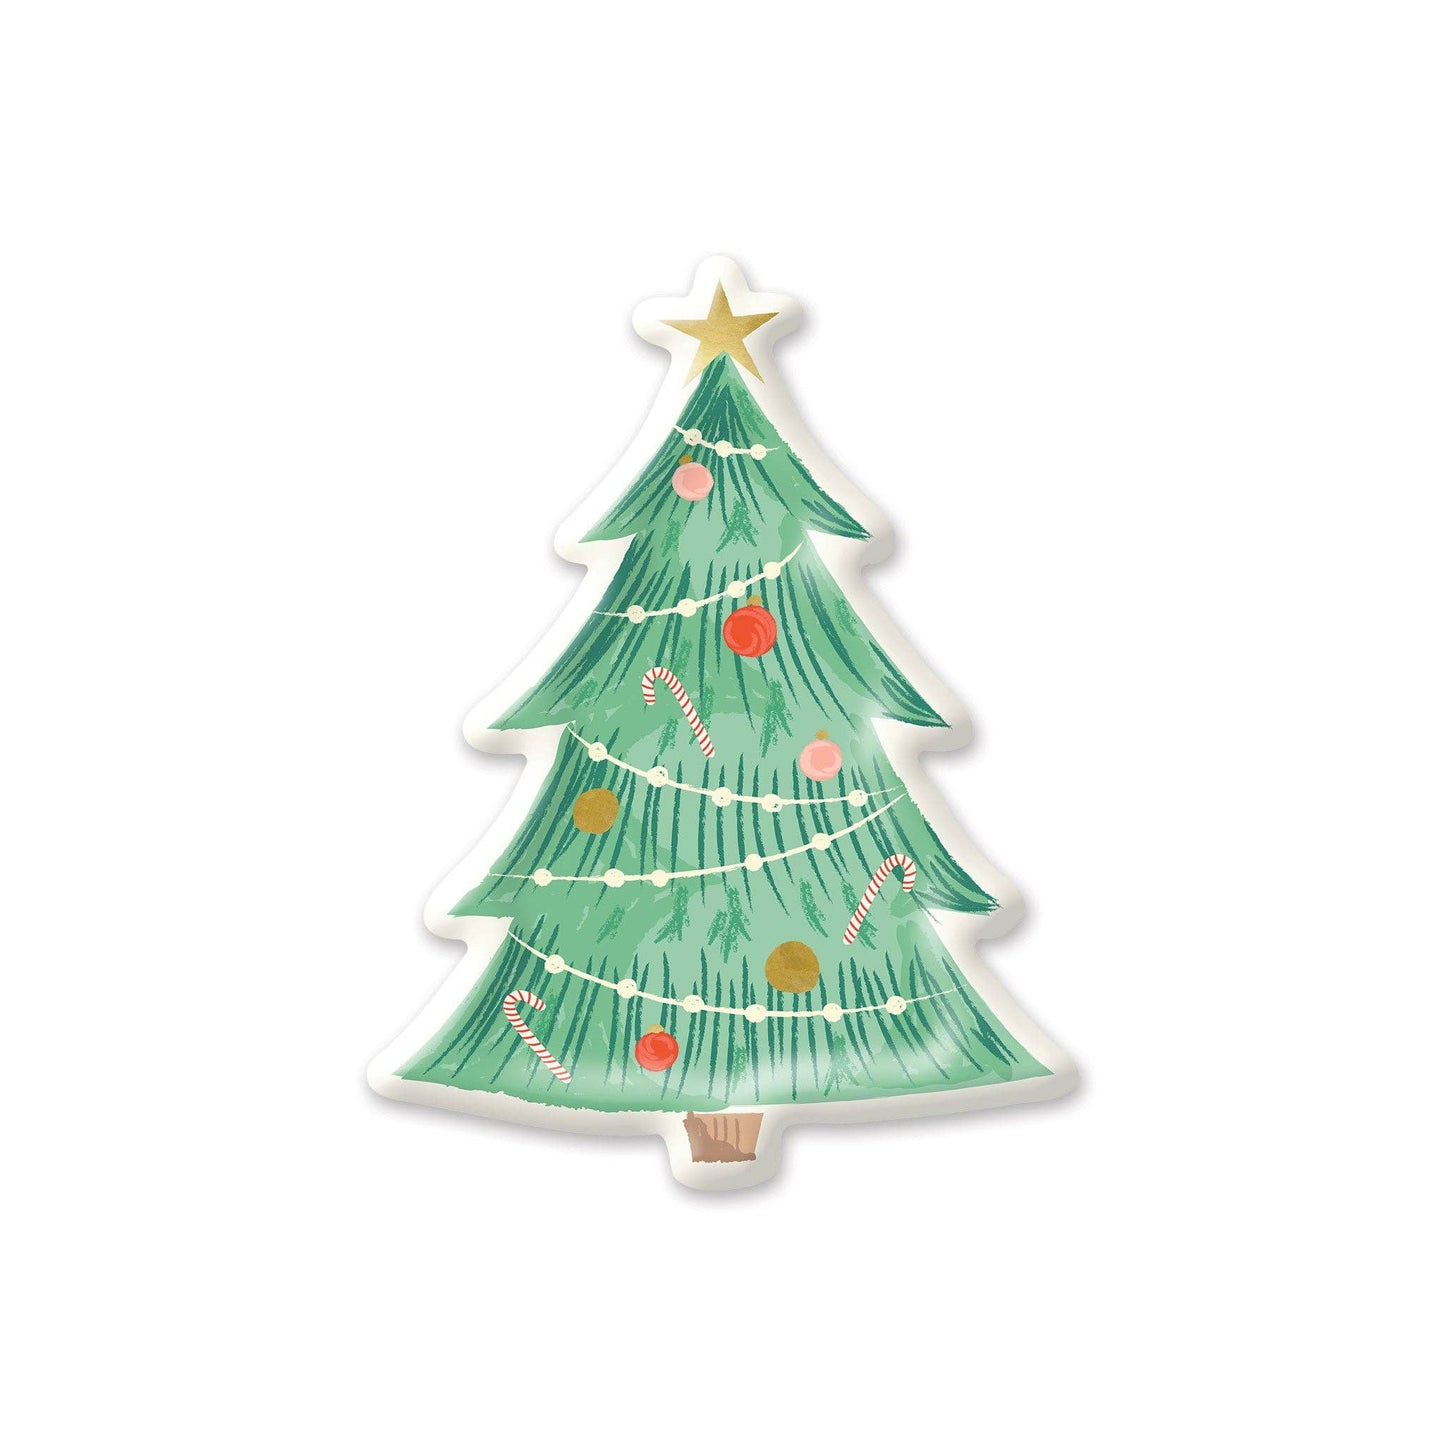 these die cut tree party plates are will add a touch of magic to your Christmas dinner, or make Christmas morning breakfast a jolly affair that your loved ones will remember for a long time.